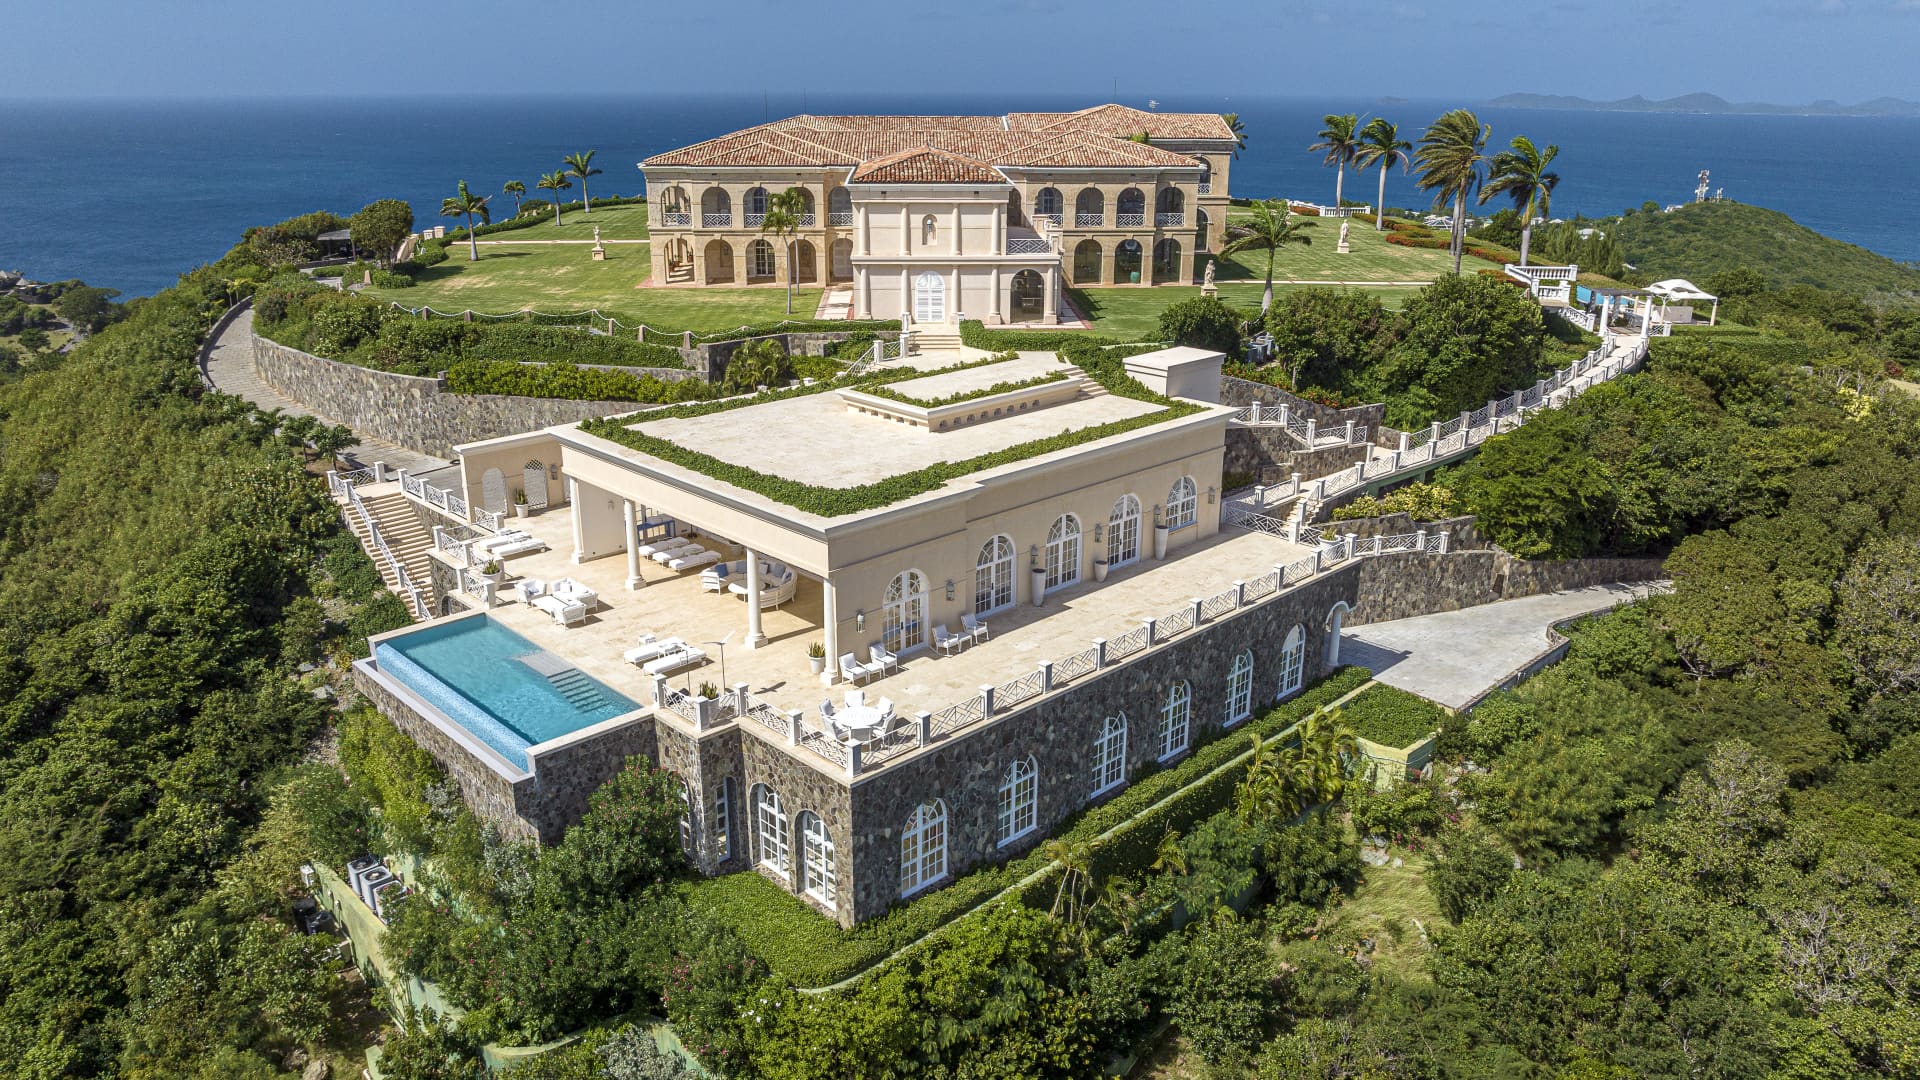 The Terrace's Annex is in the foreground just below the main villa, together the two structures span about 28,000 sq ft.